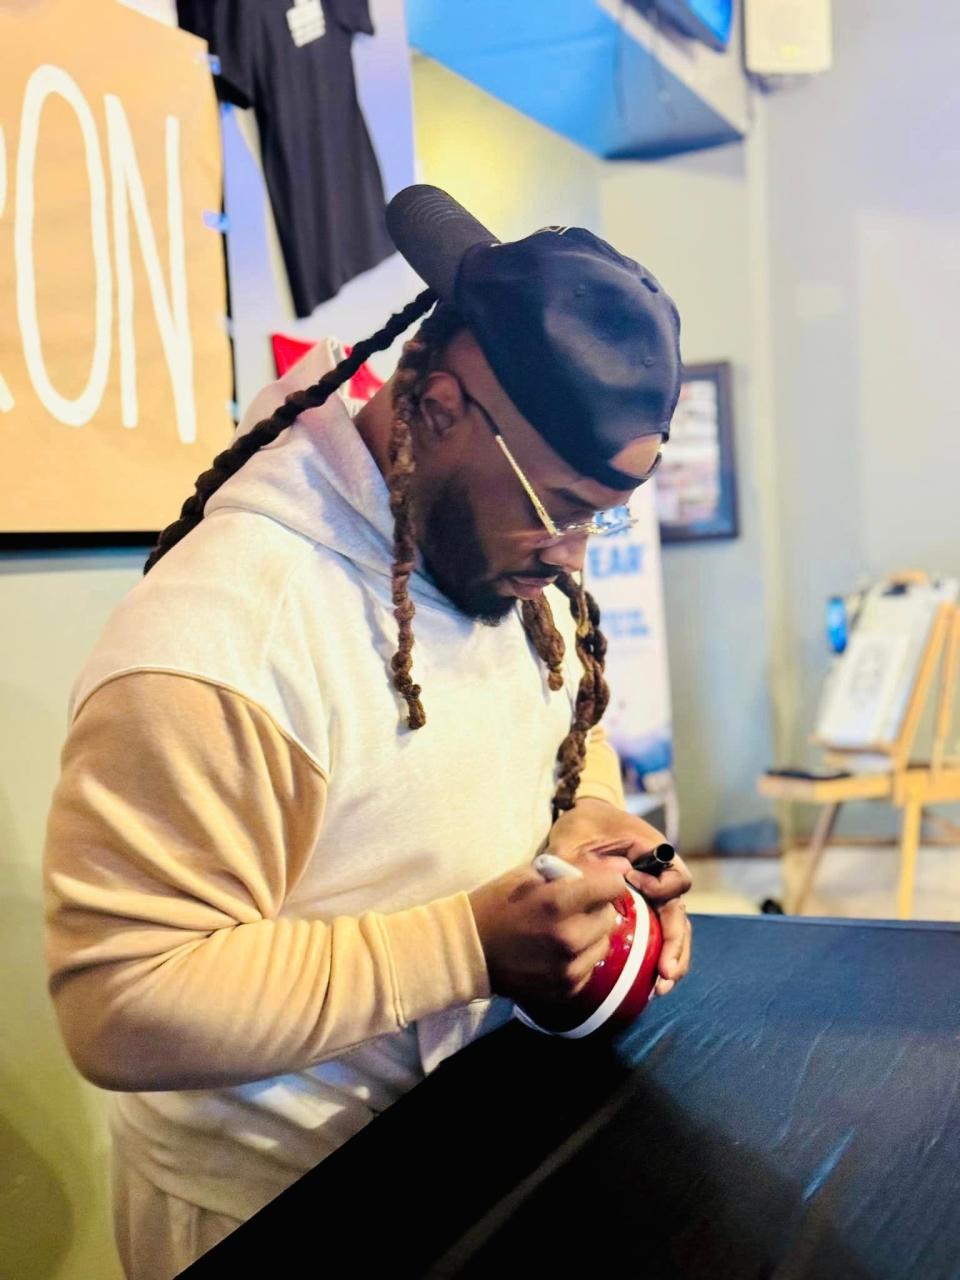 Former Alabama and NFL running back Trent Richardson is pictured Jan. 27 at The Gridiron’s 20th anniversary celebration in Gadsden